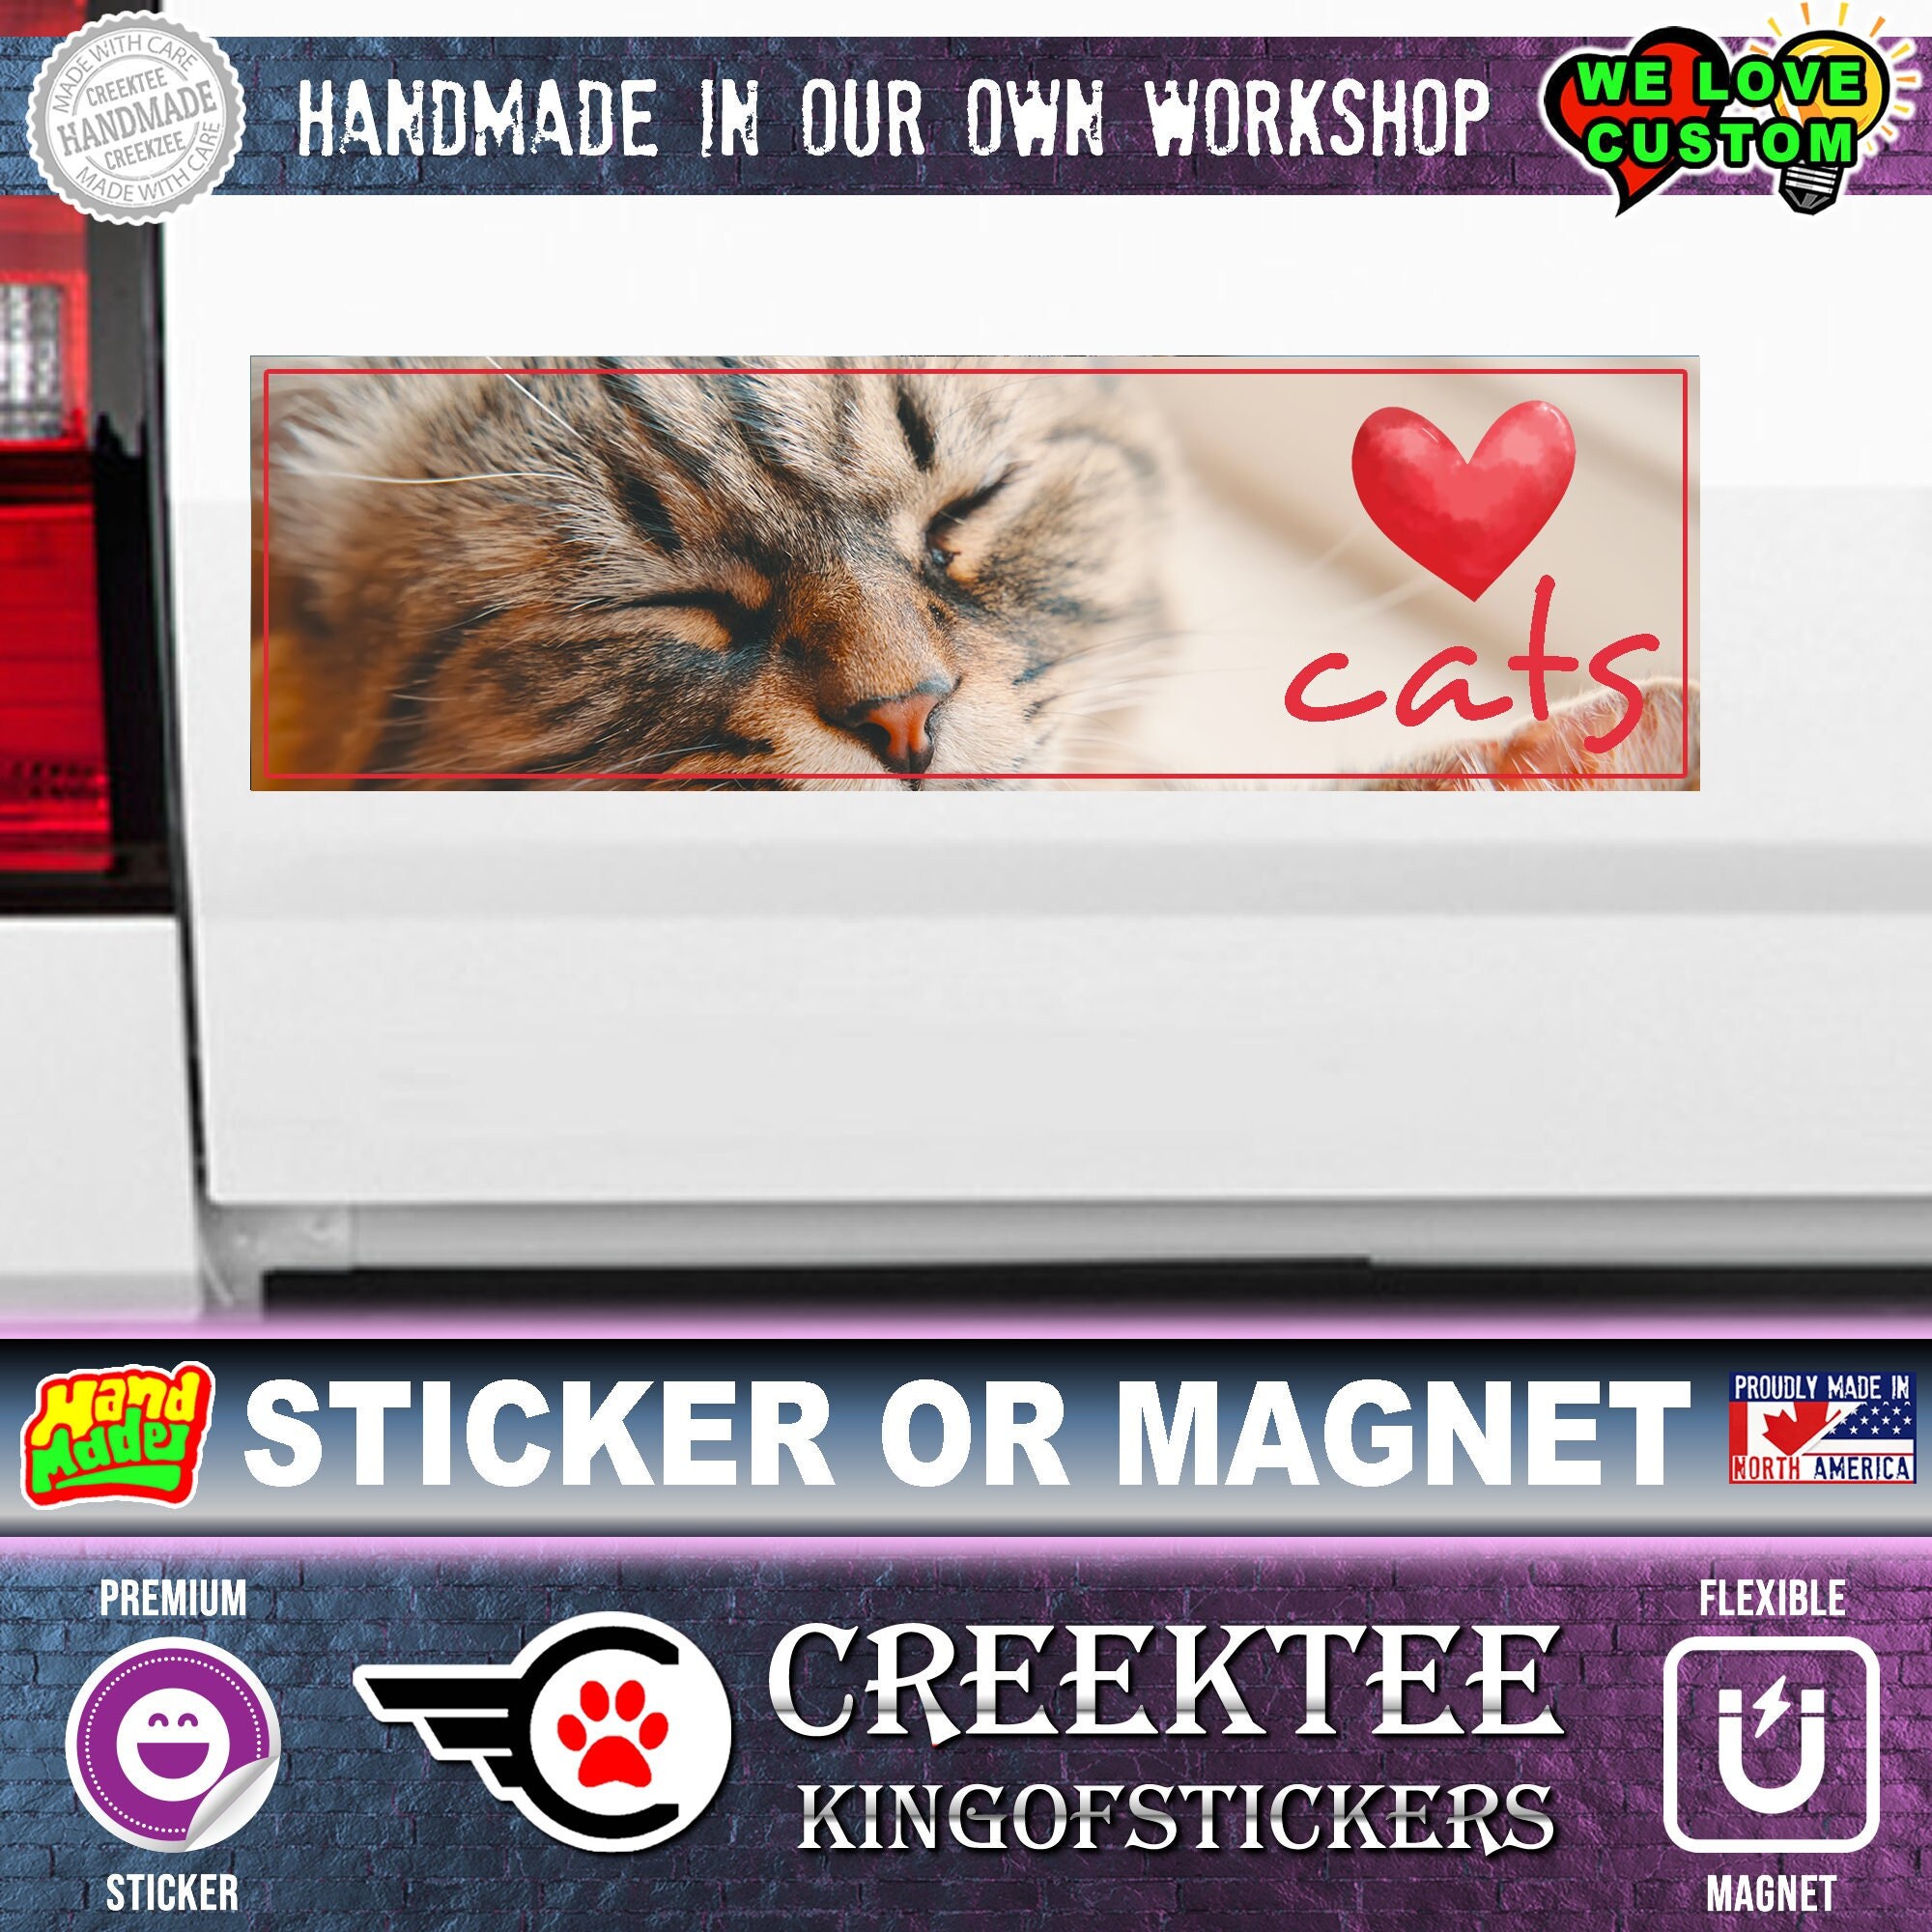 Love Cats Bumper Sticker or Magnet in various sizes, full color with UV laminate coating